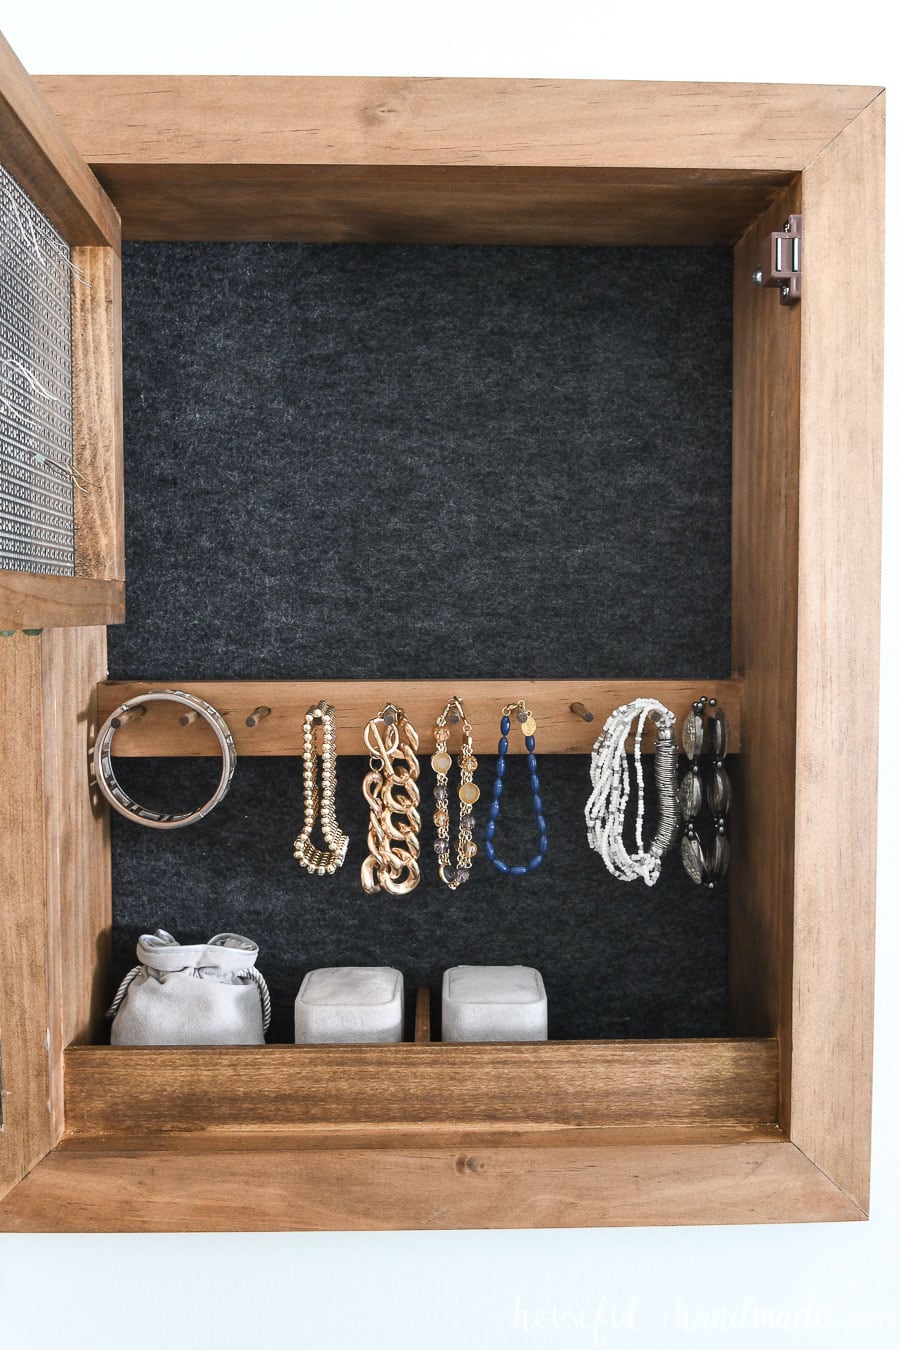 DIY jewelry cabinet opened up to see the felt back and bracelet rack.